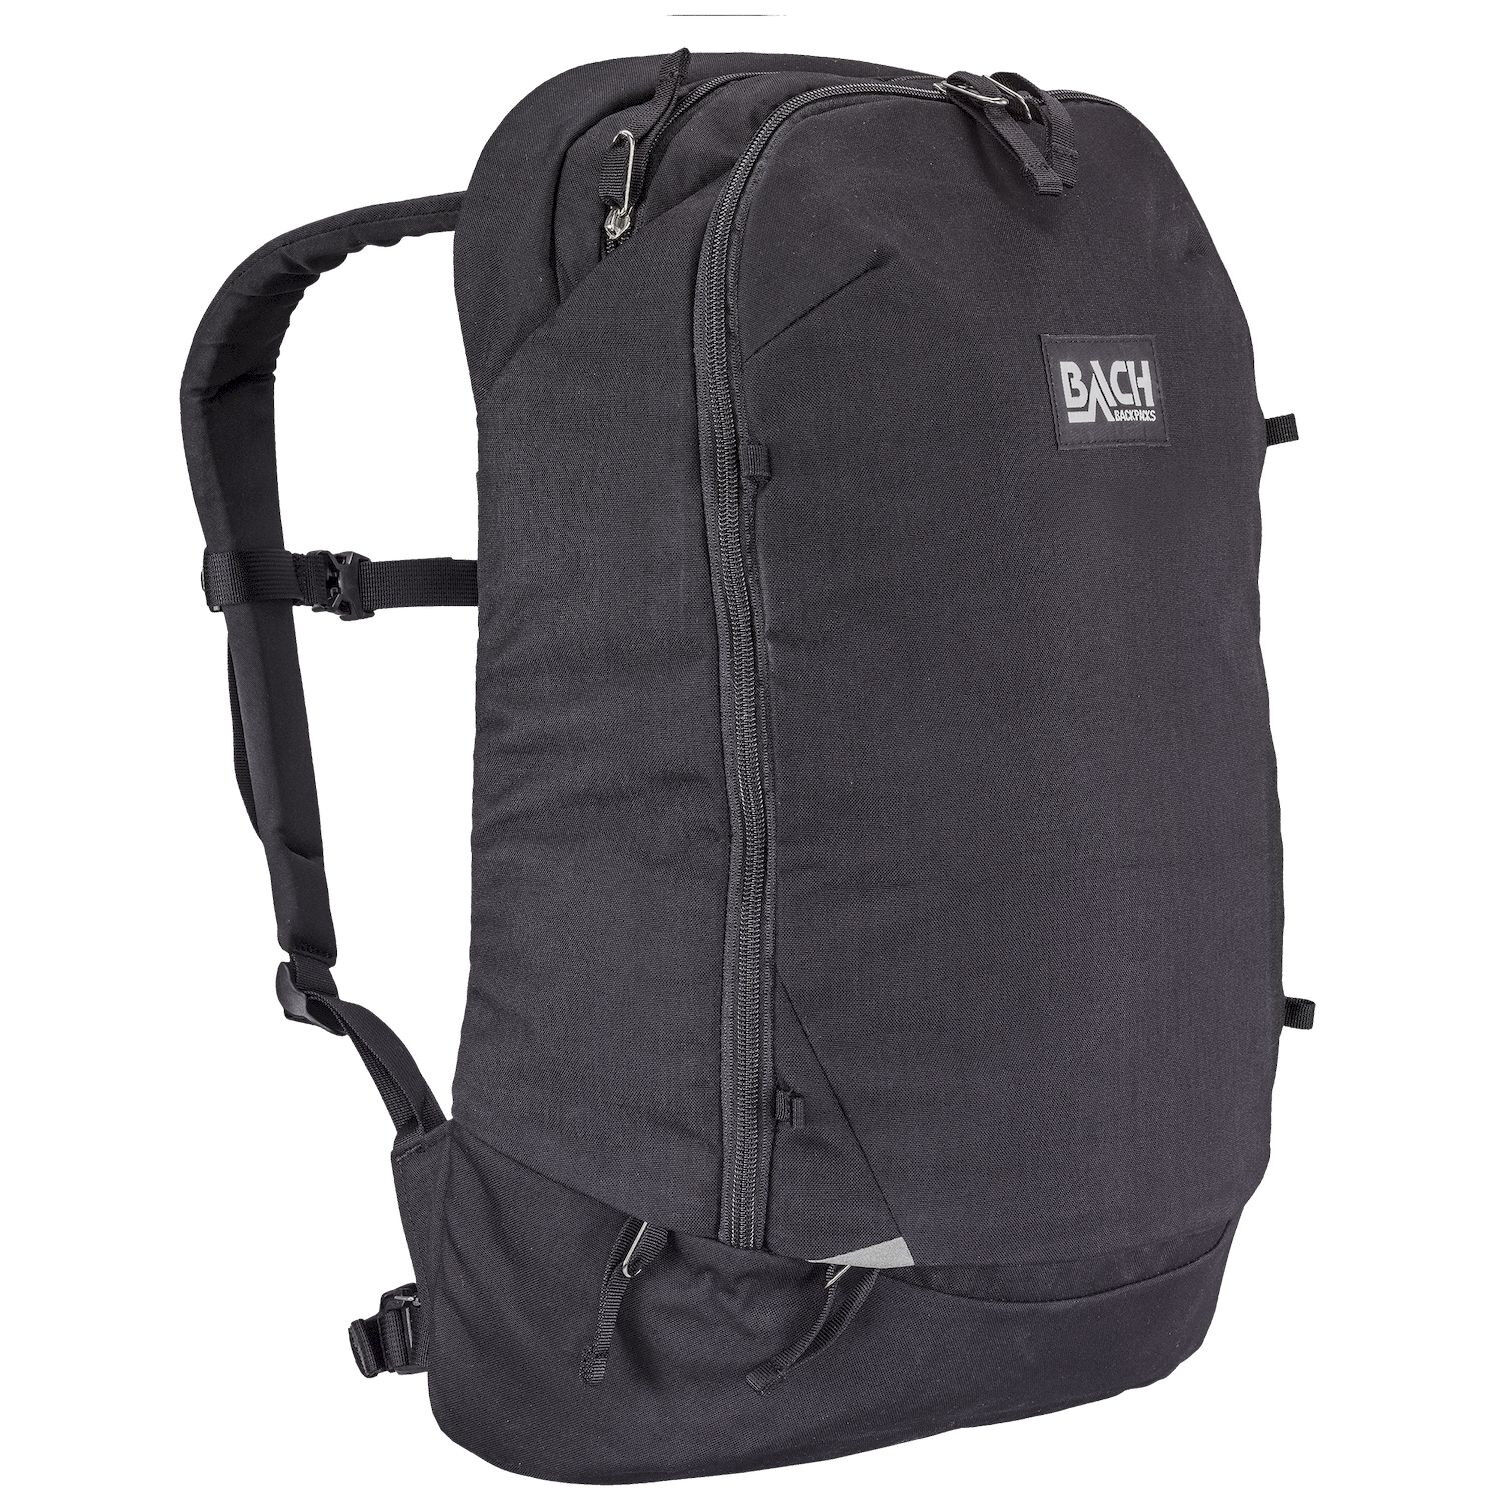 Bach Undercover 26 - Cycling backpack